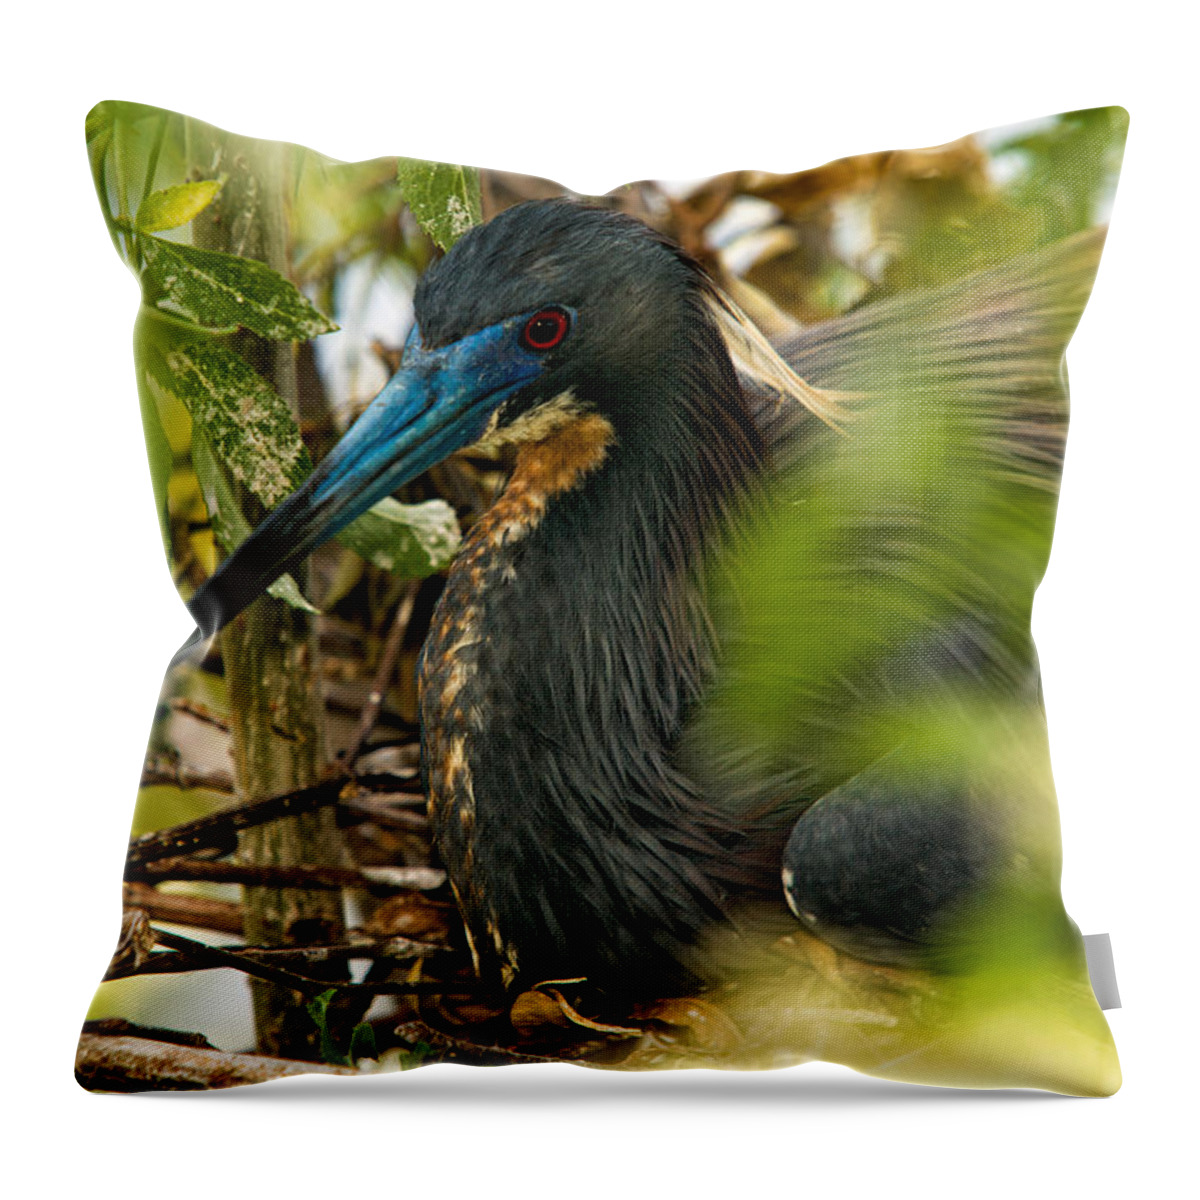 Tri-color Heron Throw Pillow featuring the photograph On The Nest by Christopher Holmes